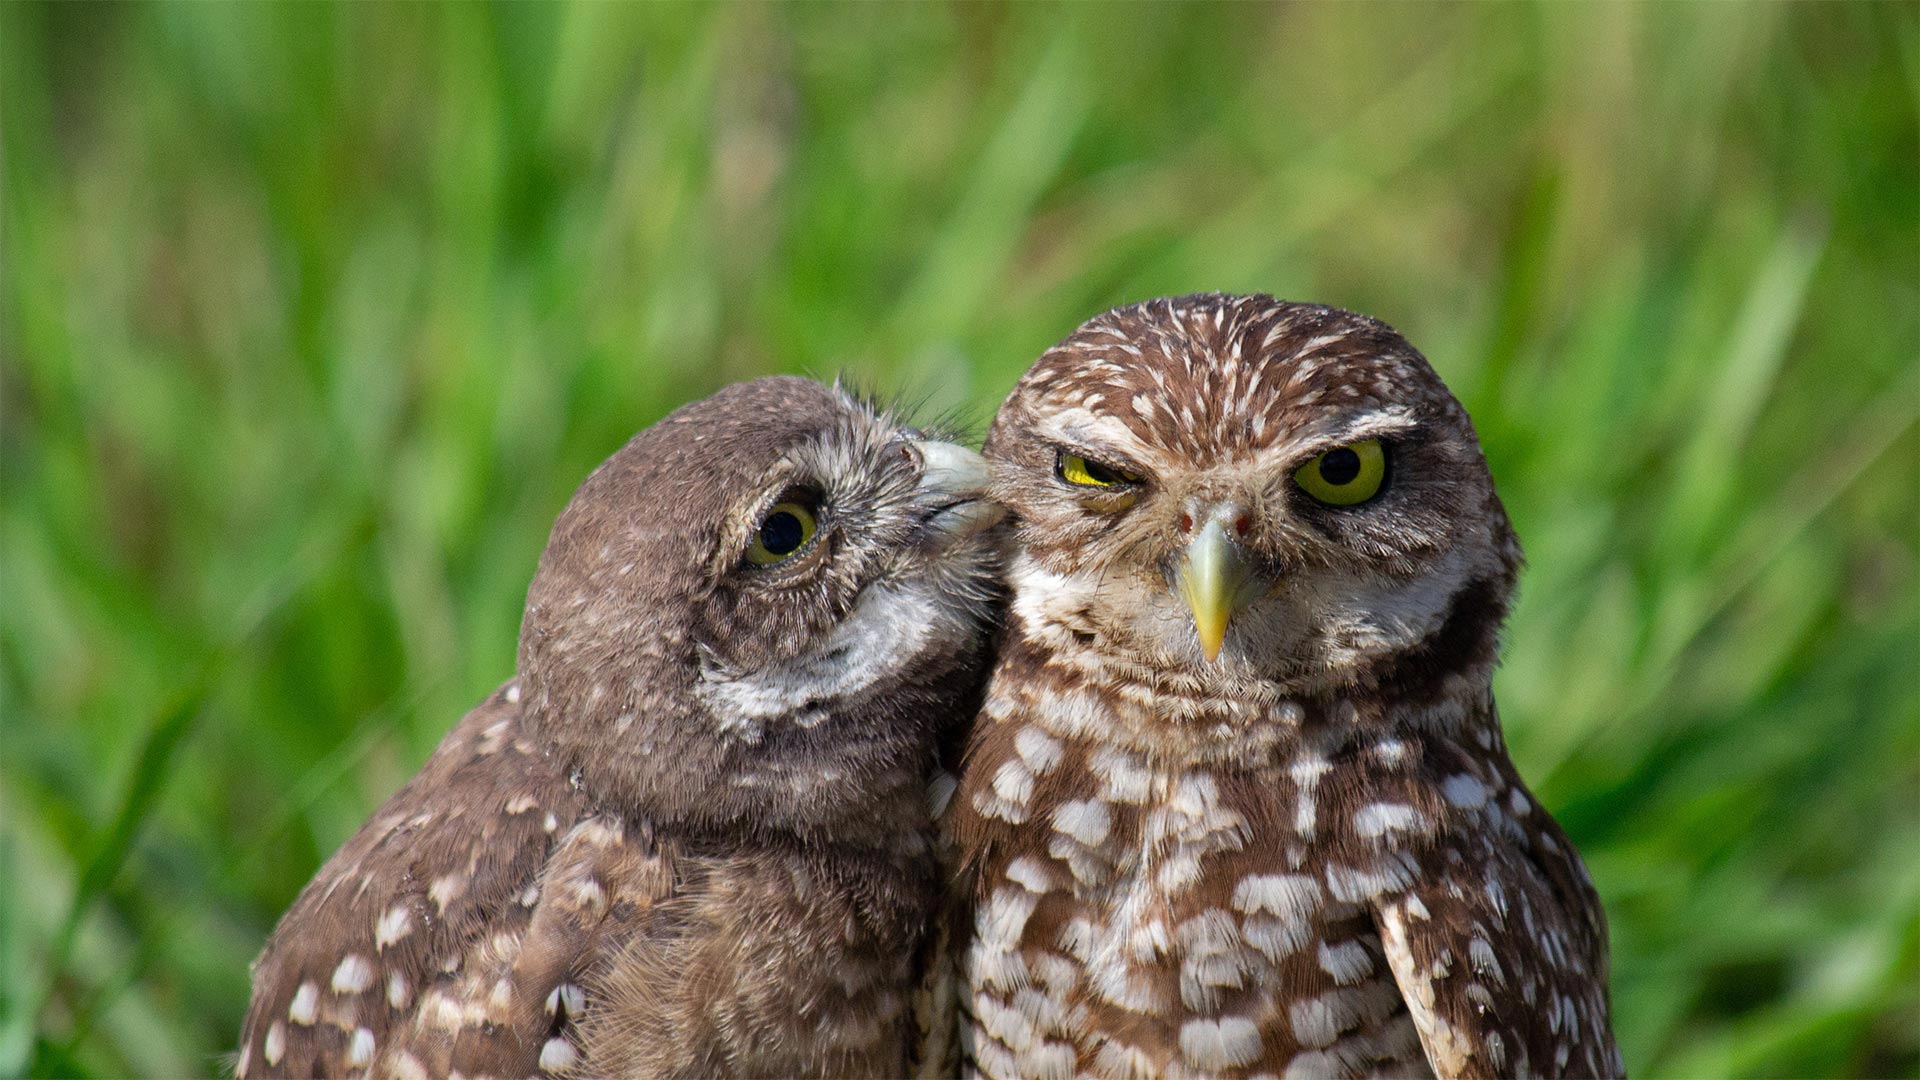 A burrowing owl chick and adult in South Florida - Carlos Carreno/Getty Images)